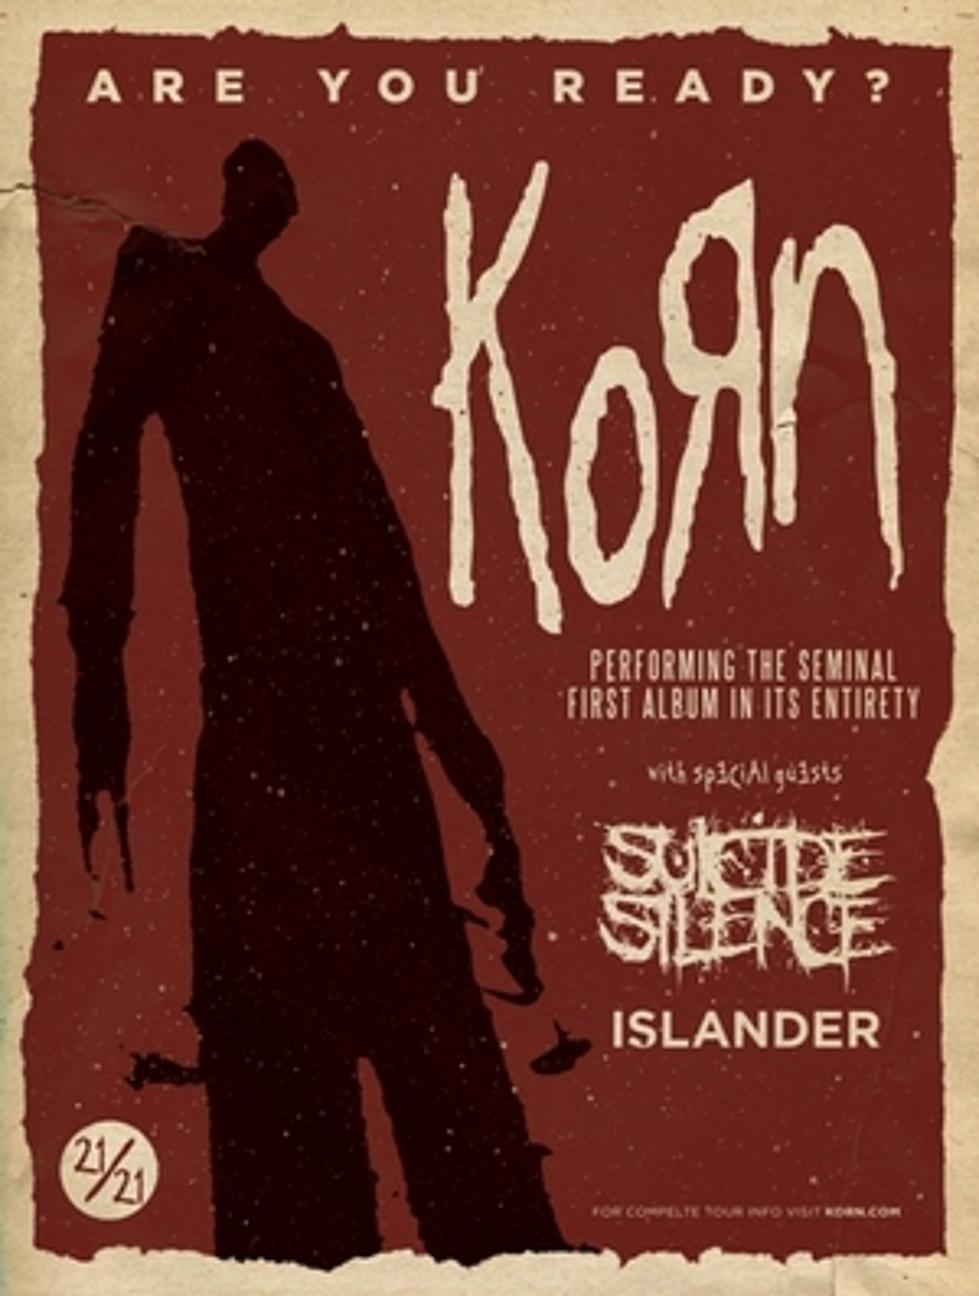 Korn To Play Self-Titled Debut Album in Its Entirety During Fall 2015 U.S. Tour